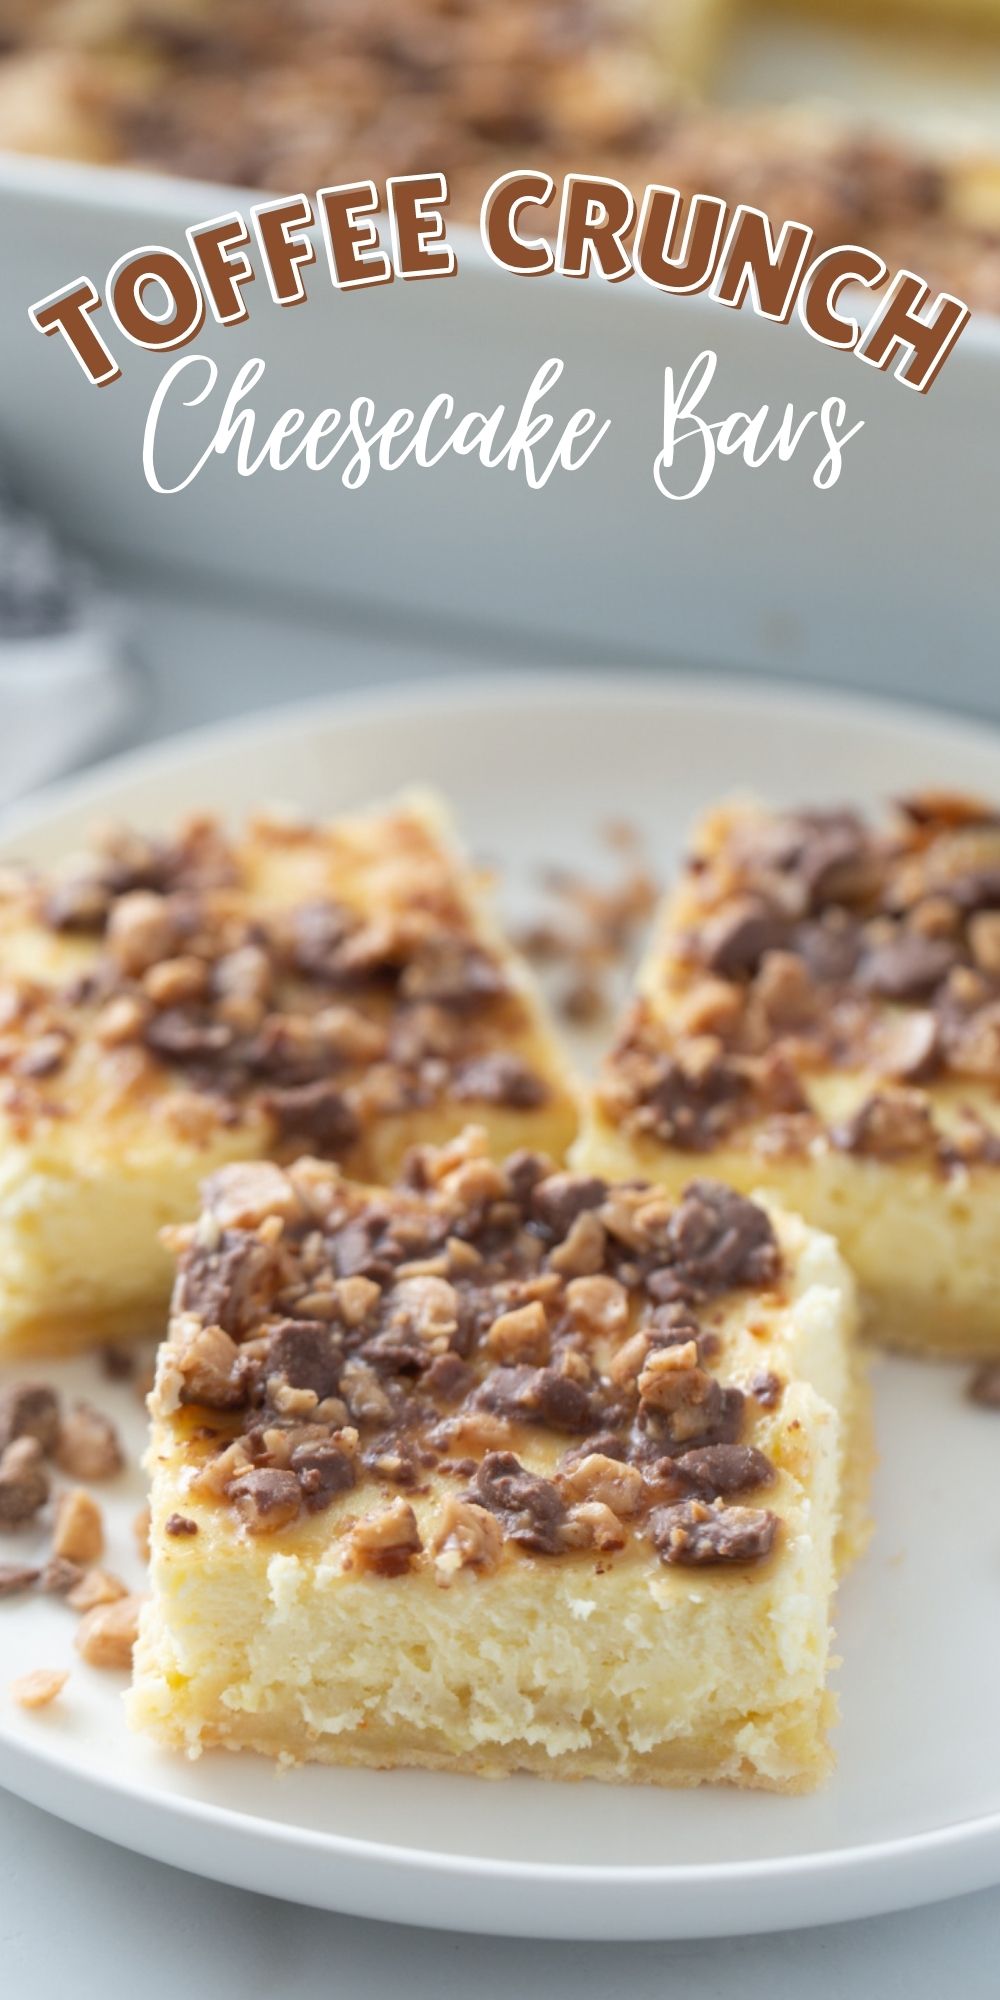 These Toffee Crunch Cheesecake Bars are super creamy, starting with a cookie dough crust and topped with crunchy crushed toffee bits. via @familyfresh